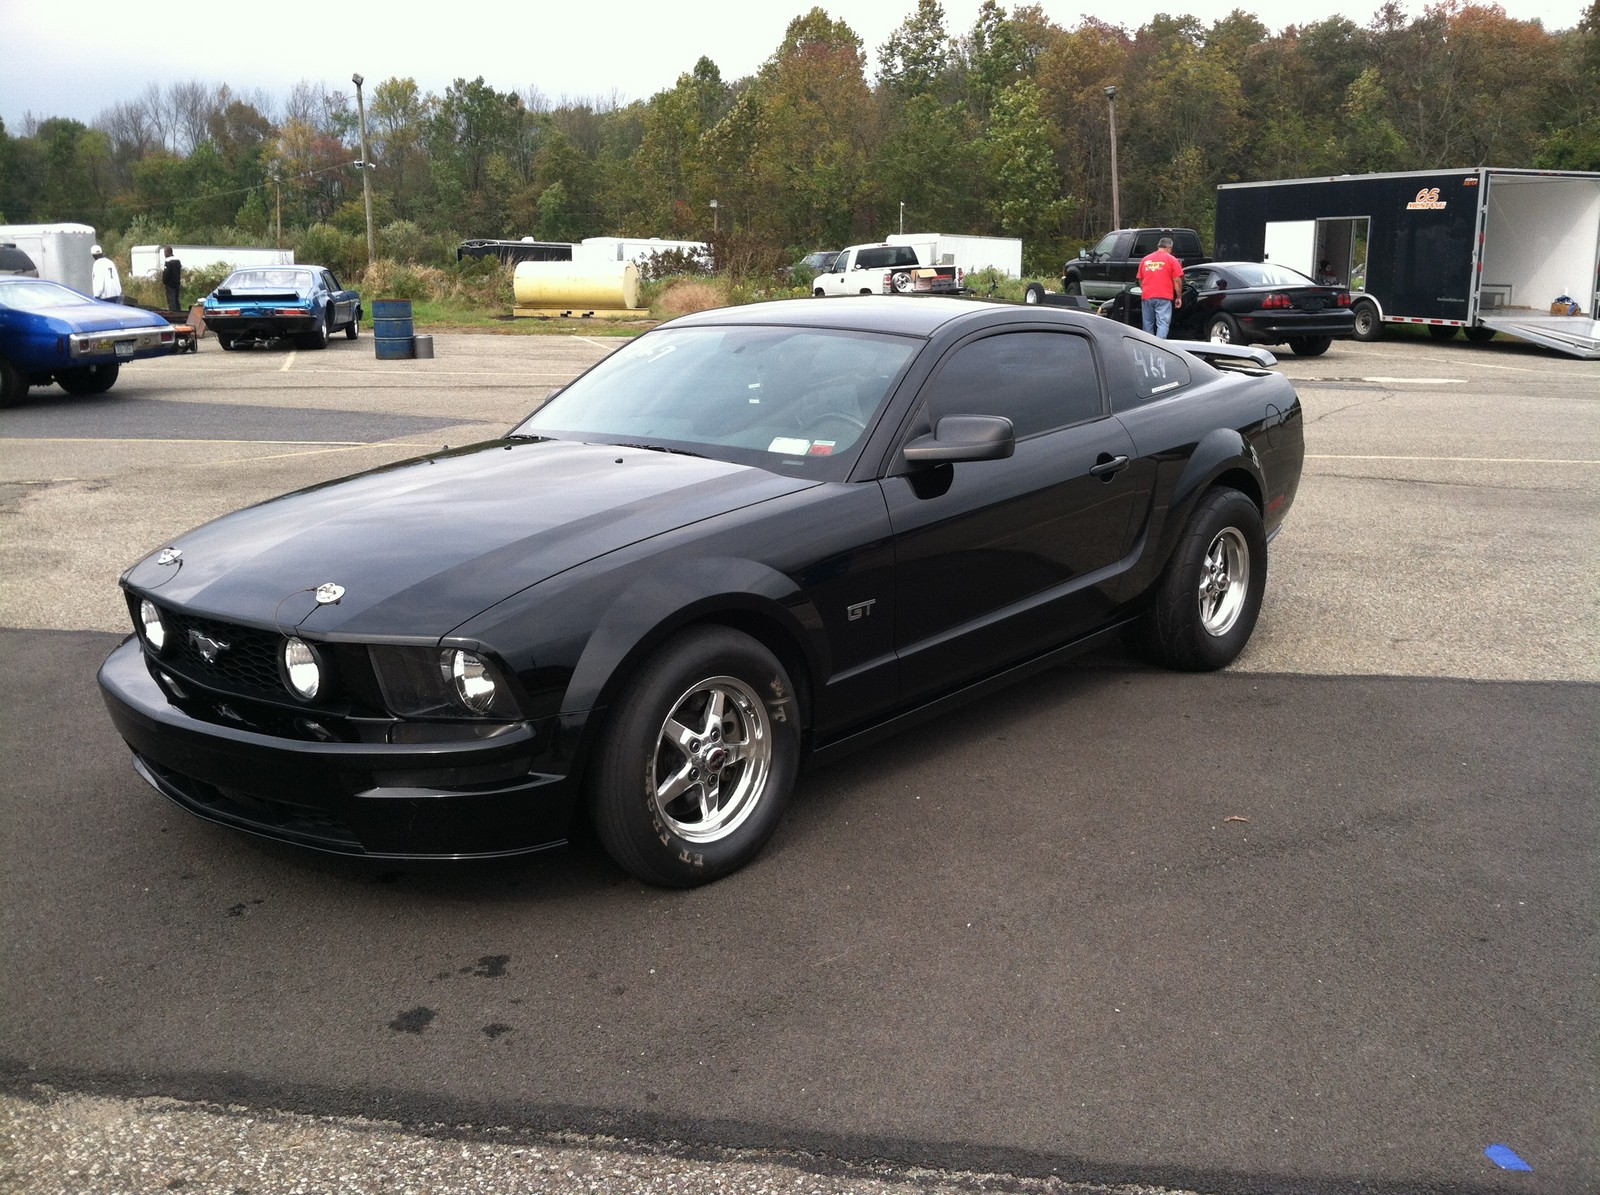 2006 Ford mustang 0-60 times #3